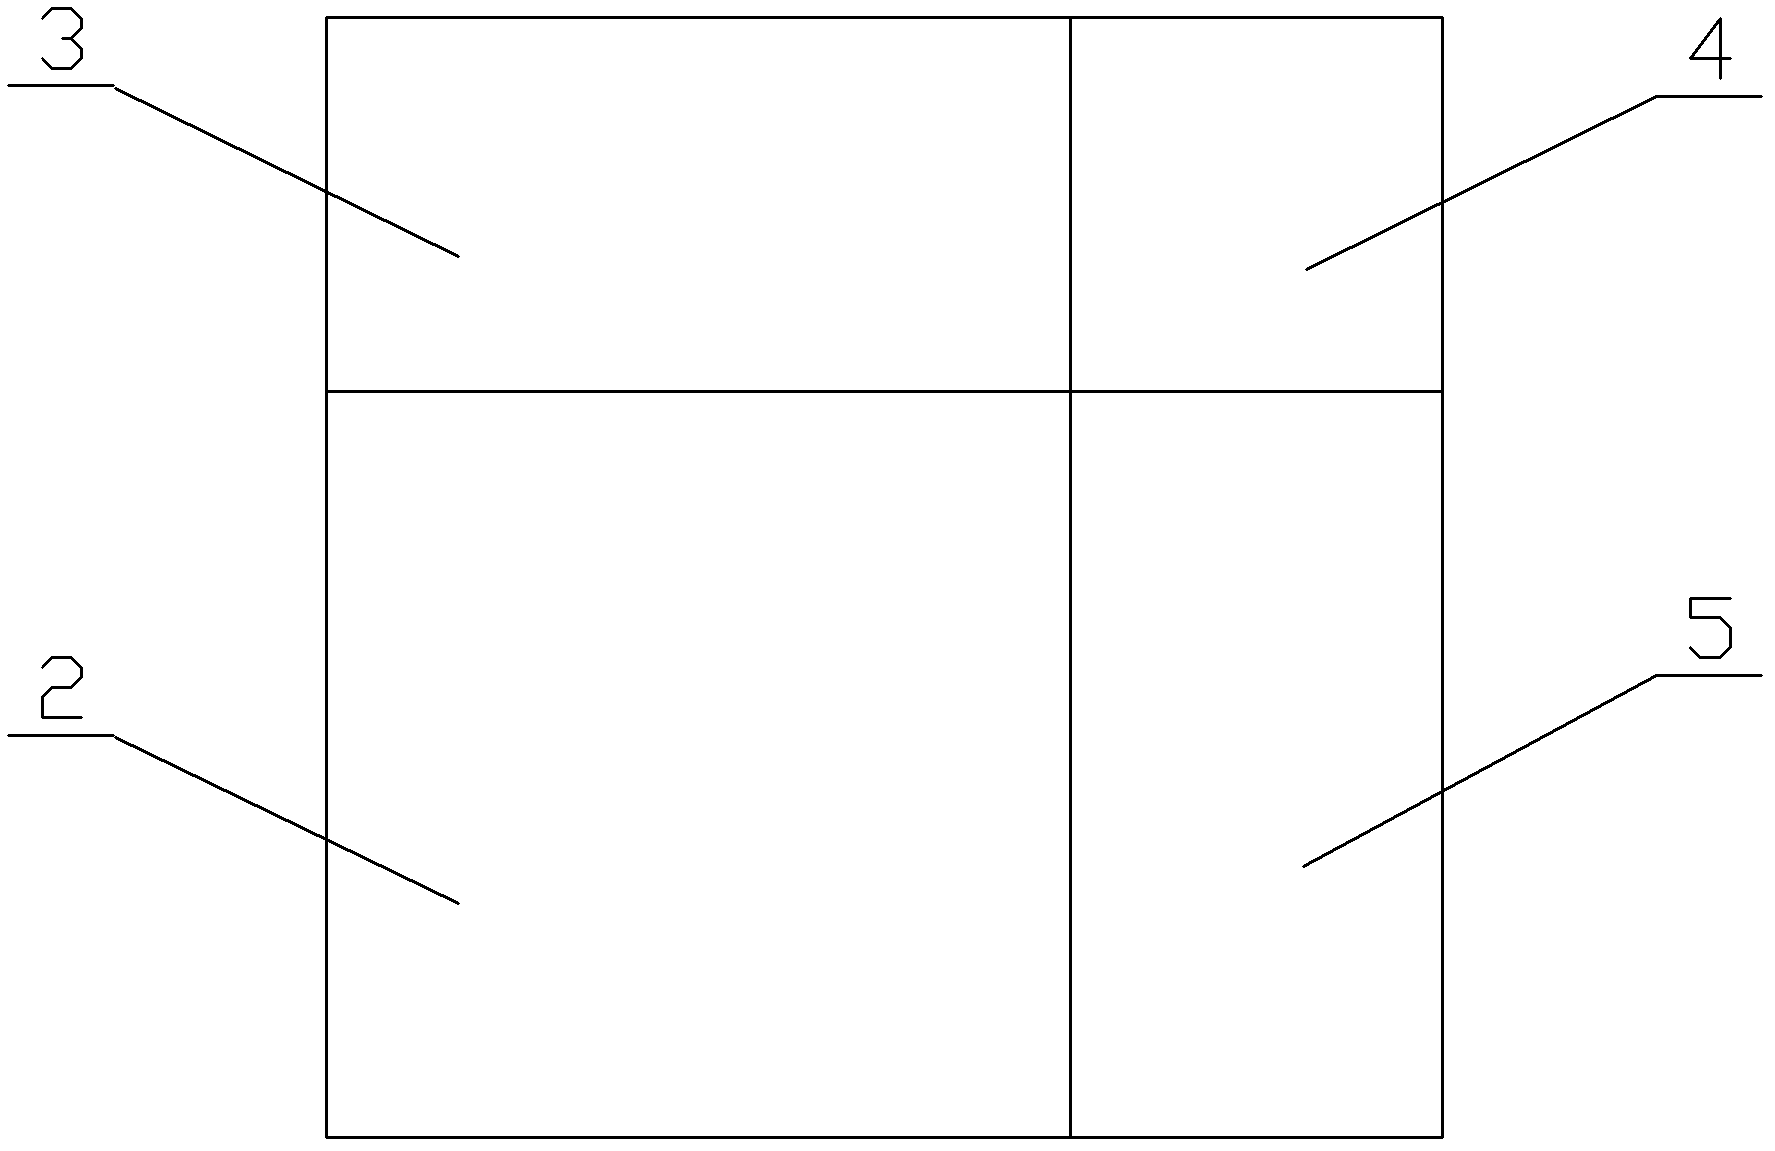 Short right-angled side, long right-angled side and hypotenuse jigsaw board